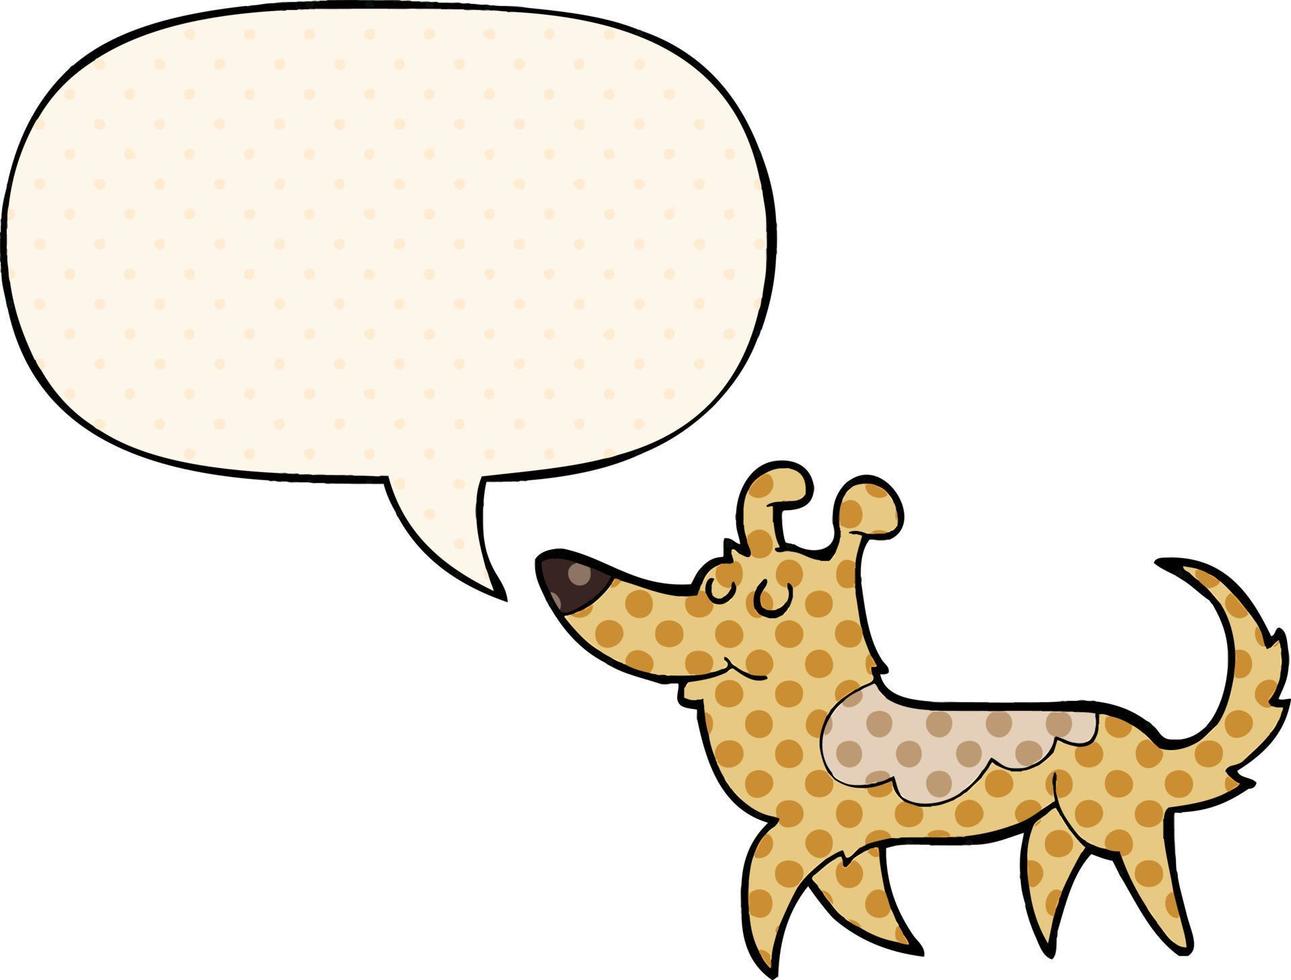 cartoon dog and speech bubble in comic book style vector